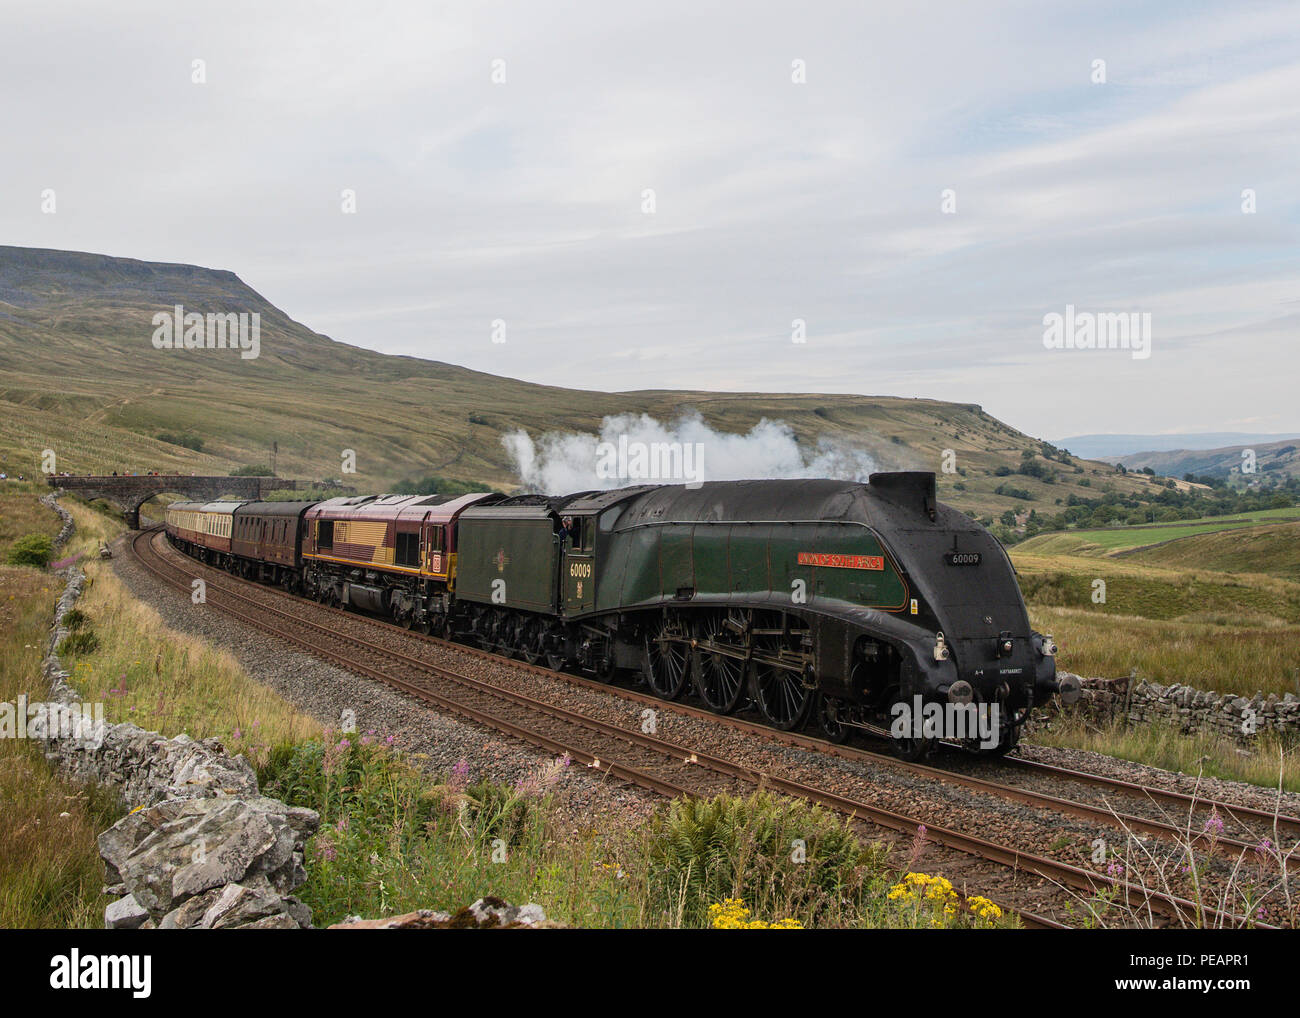 LNER Class A4 4488 Union of South Africa at Aisgill Saturday 11 August 2018 Settle Carlisle Line Stock Photo